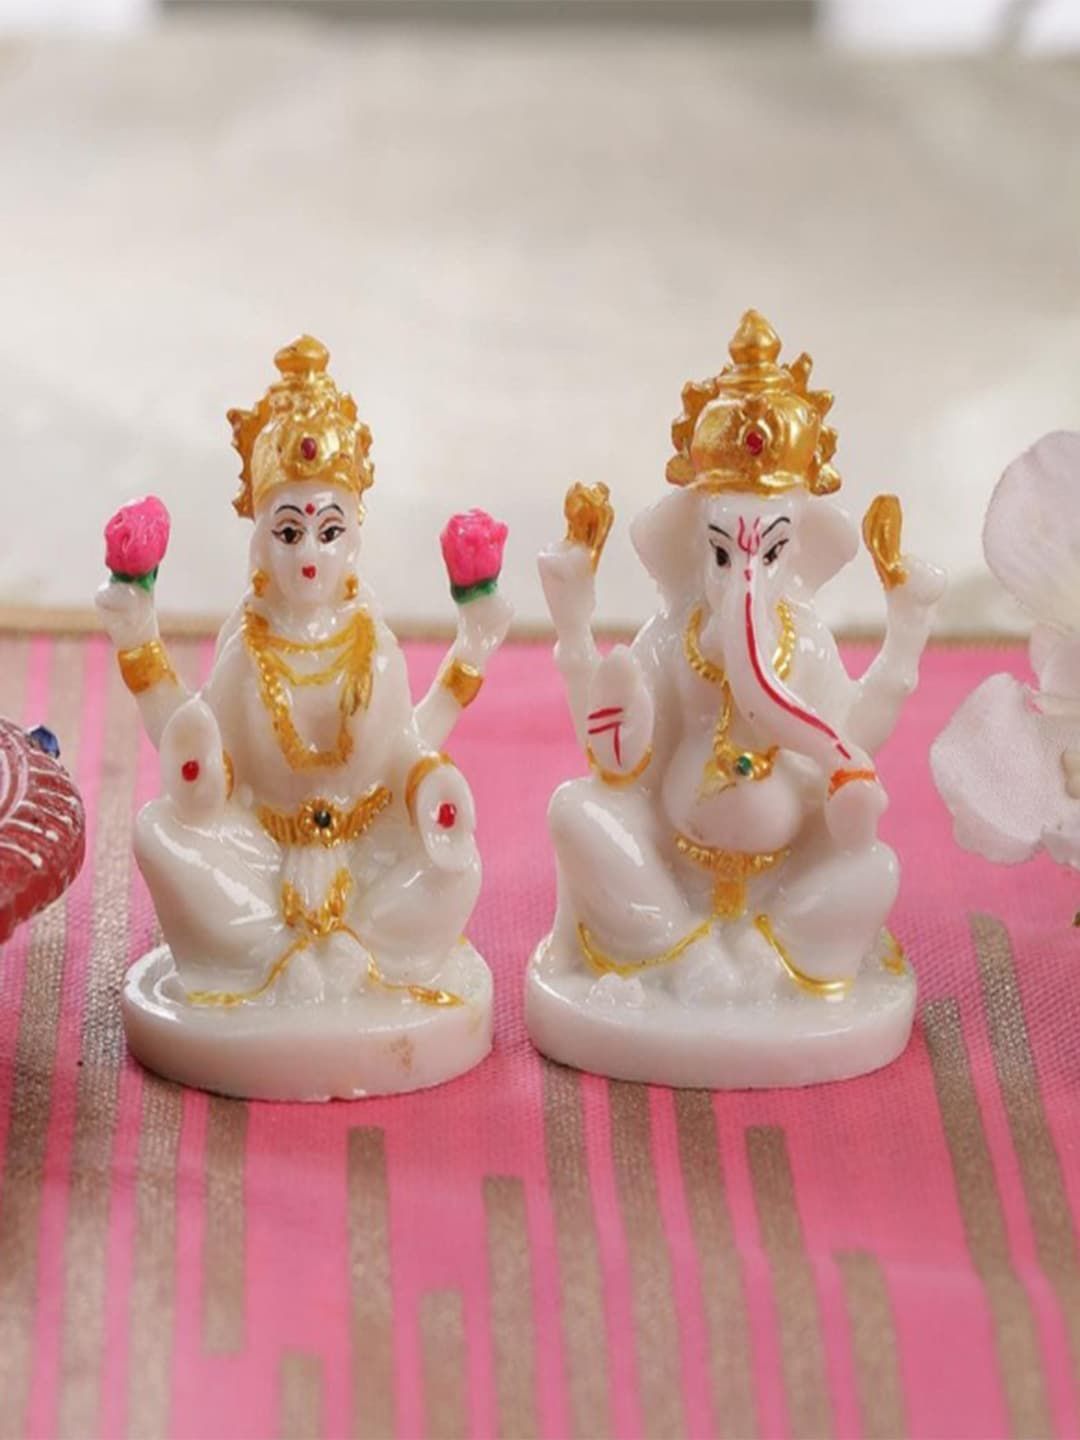 Gallery99 White & Gold-Colored Handpainted Laxmi Ganesh Idol Showpieces Price in India